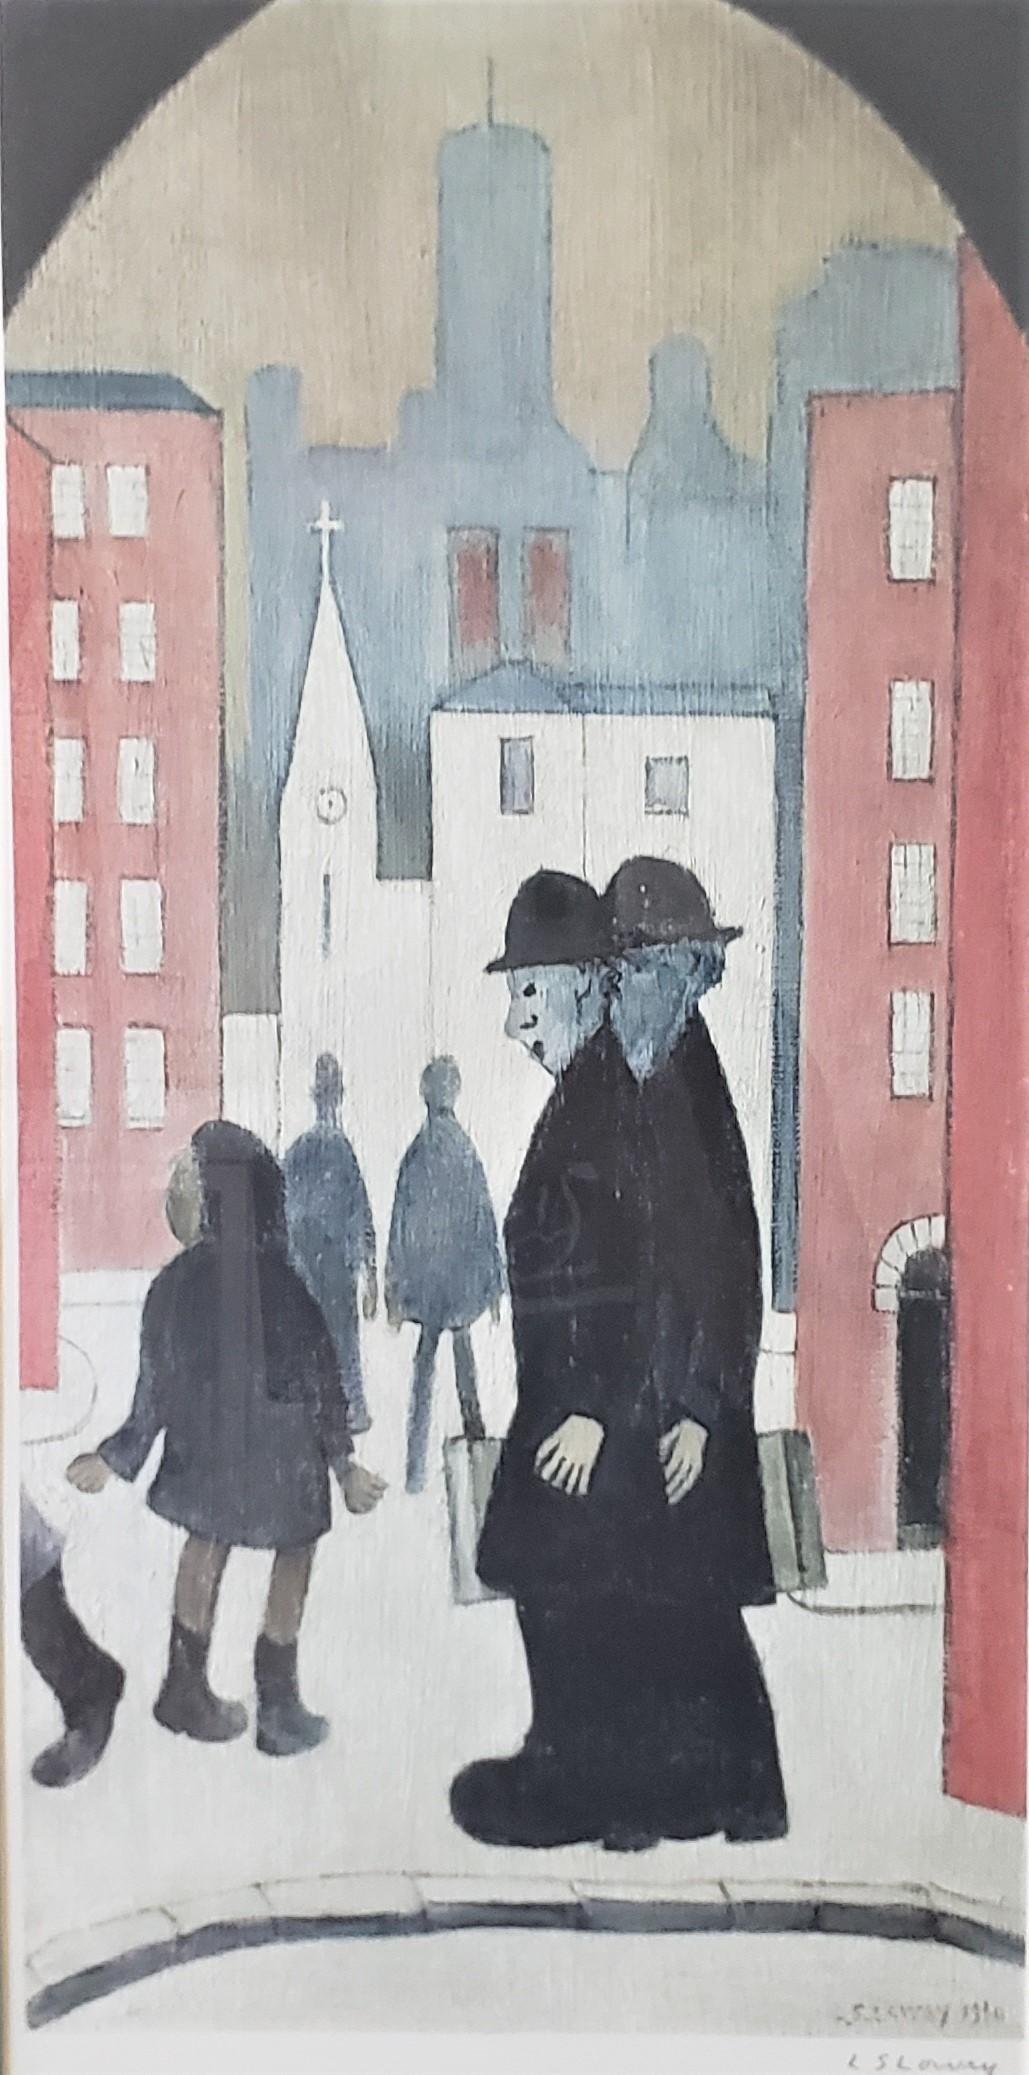 This lithograph was done by the well known British artist L.S. Lowry and dating to 1980 and done in his Modernist style. This framed lithograph is entitled 